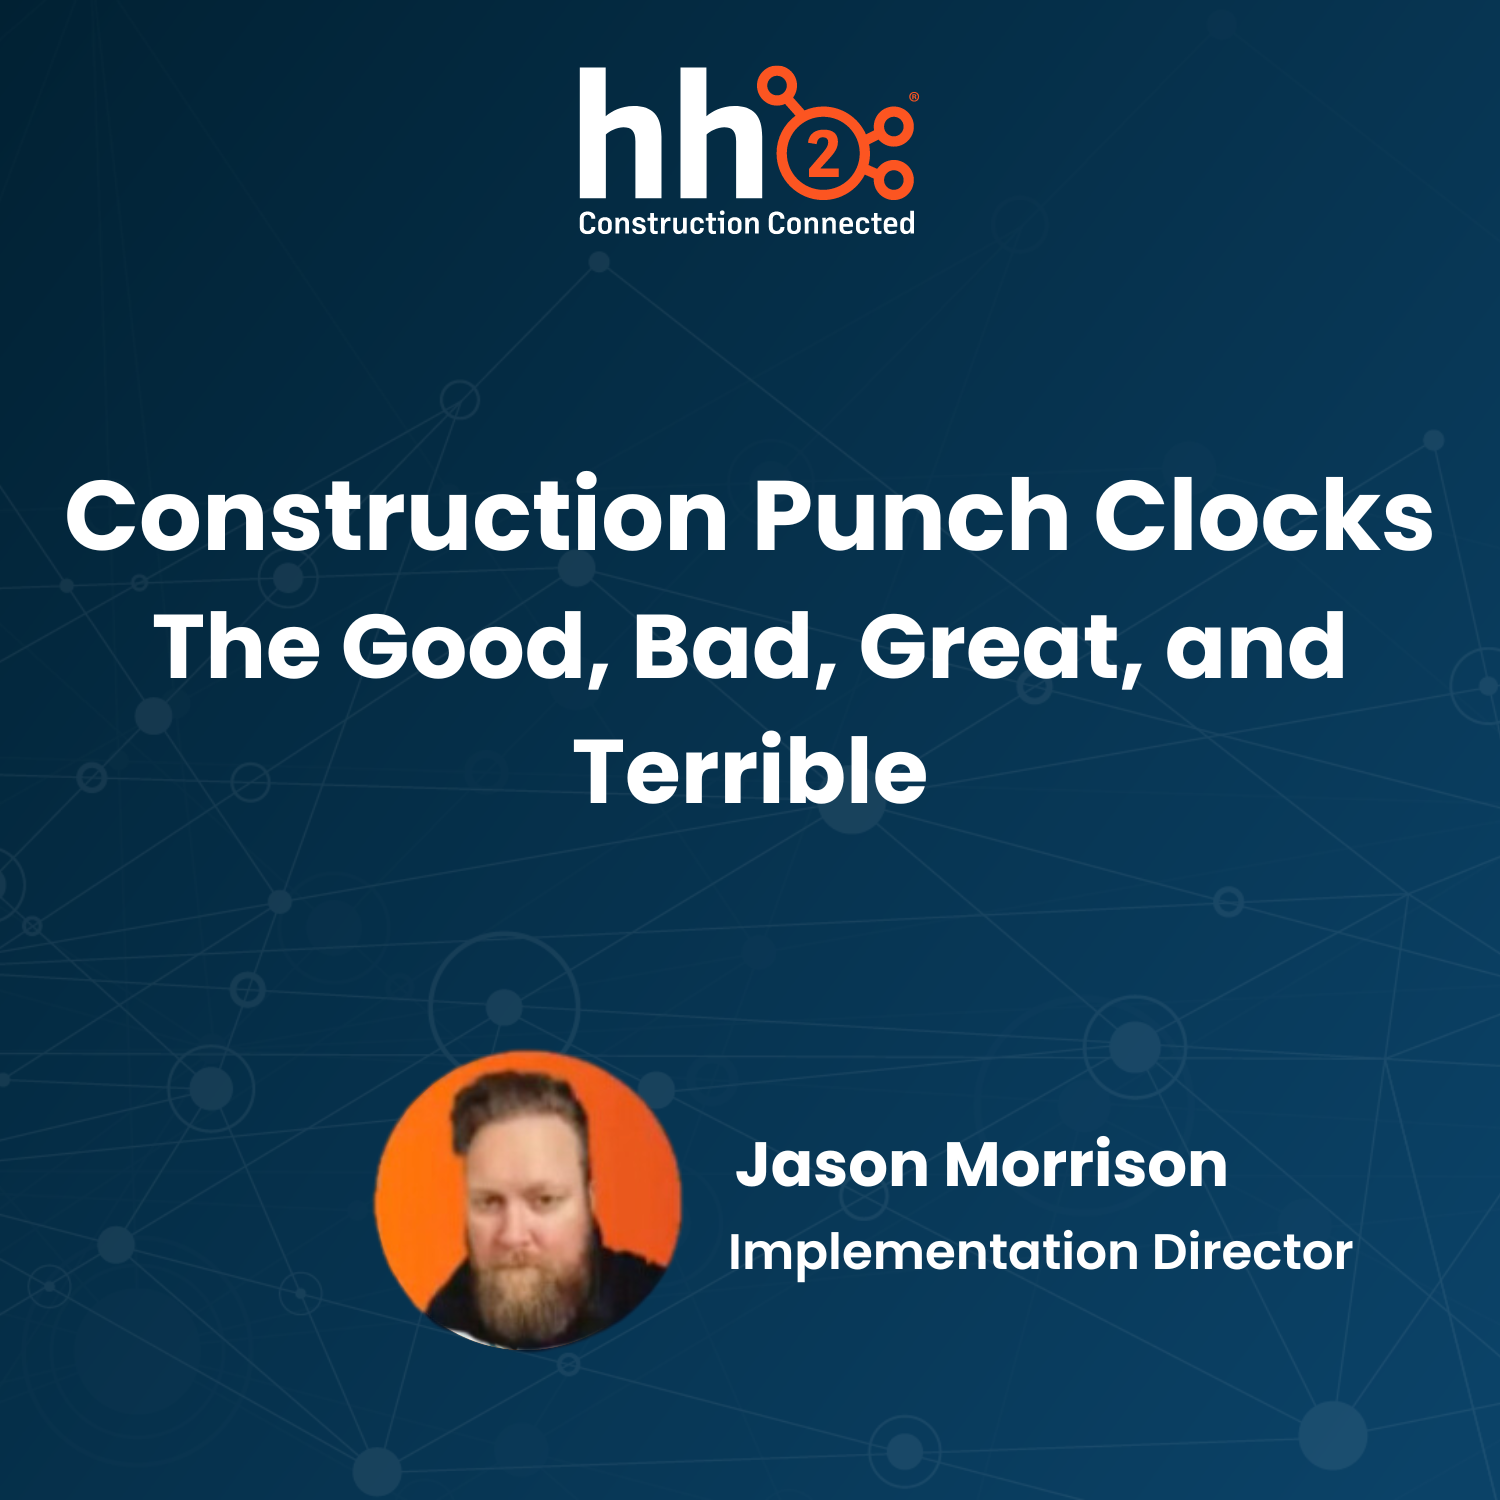 Construction Punch Clocks - The Good, Bad, Great, and Terrible